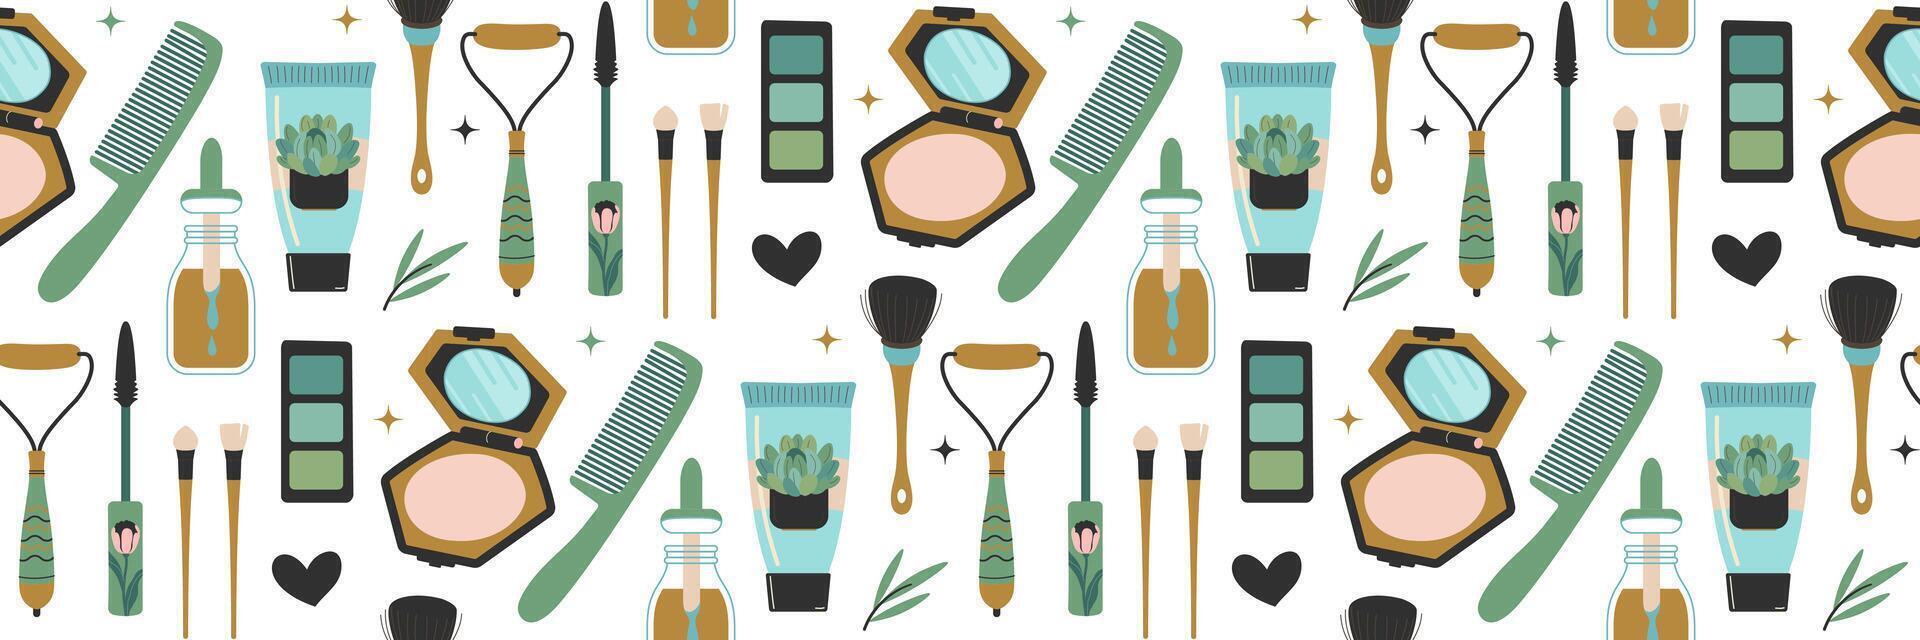 Seamless pattern with cosmetics and body care products. Hand drawn Beauty and makeup icons set. Face cream, serum, eye shadow, mascara, powder, brushes. Vector illustration for packaging, shops, web.